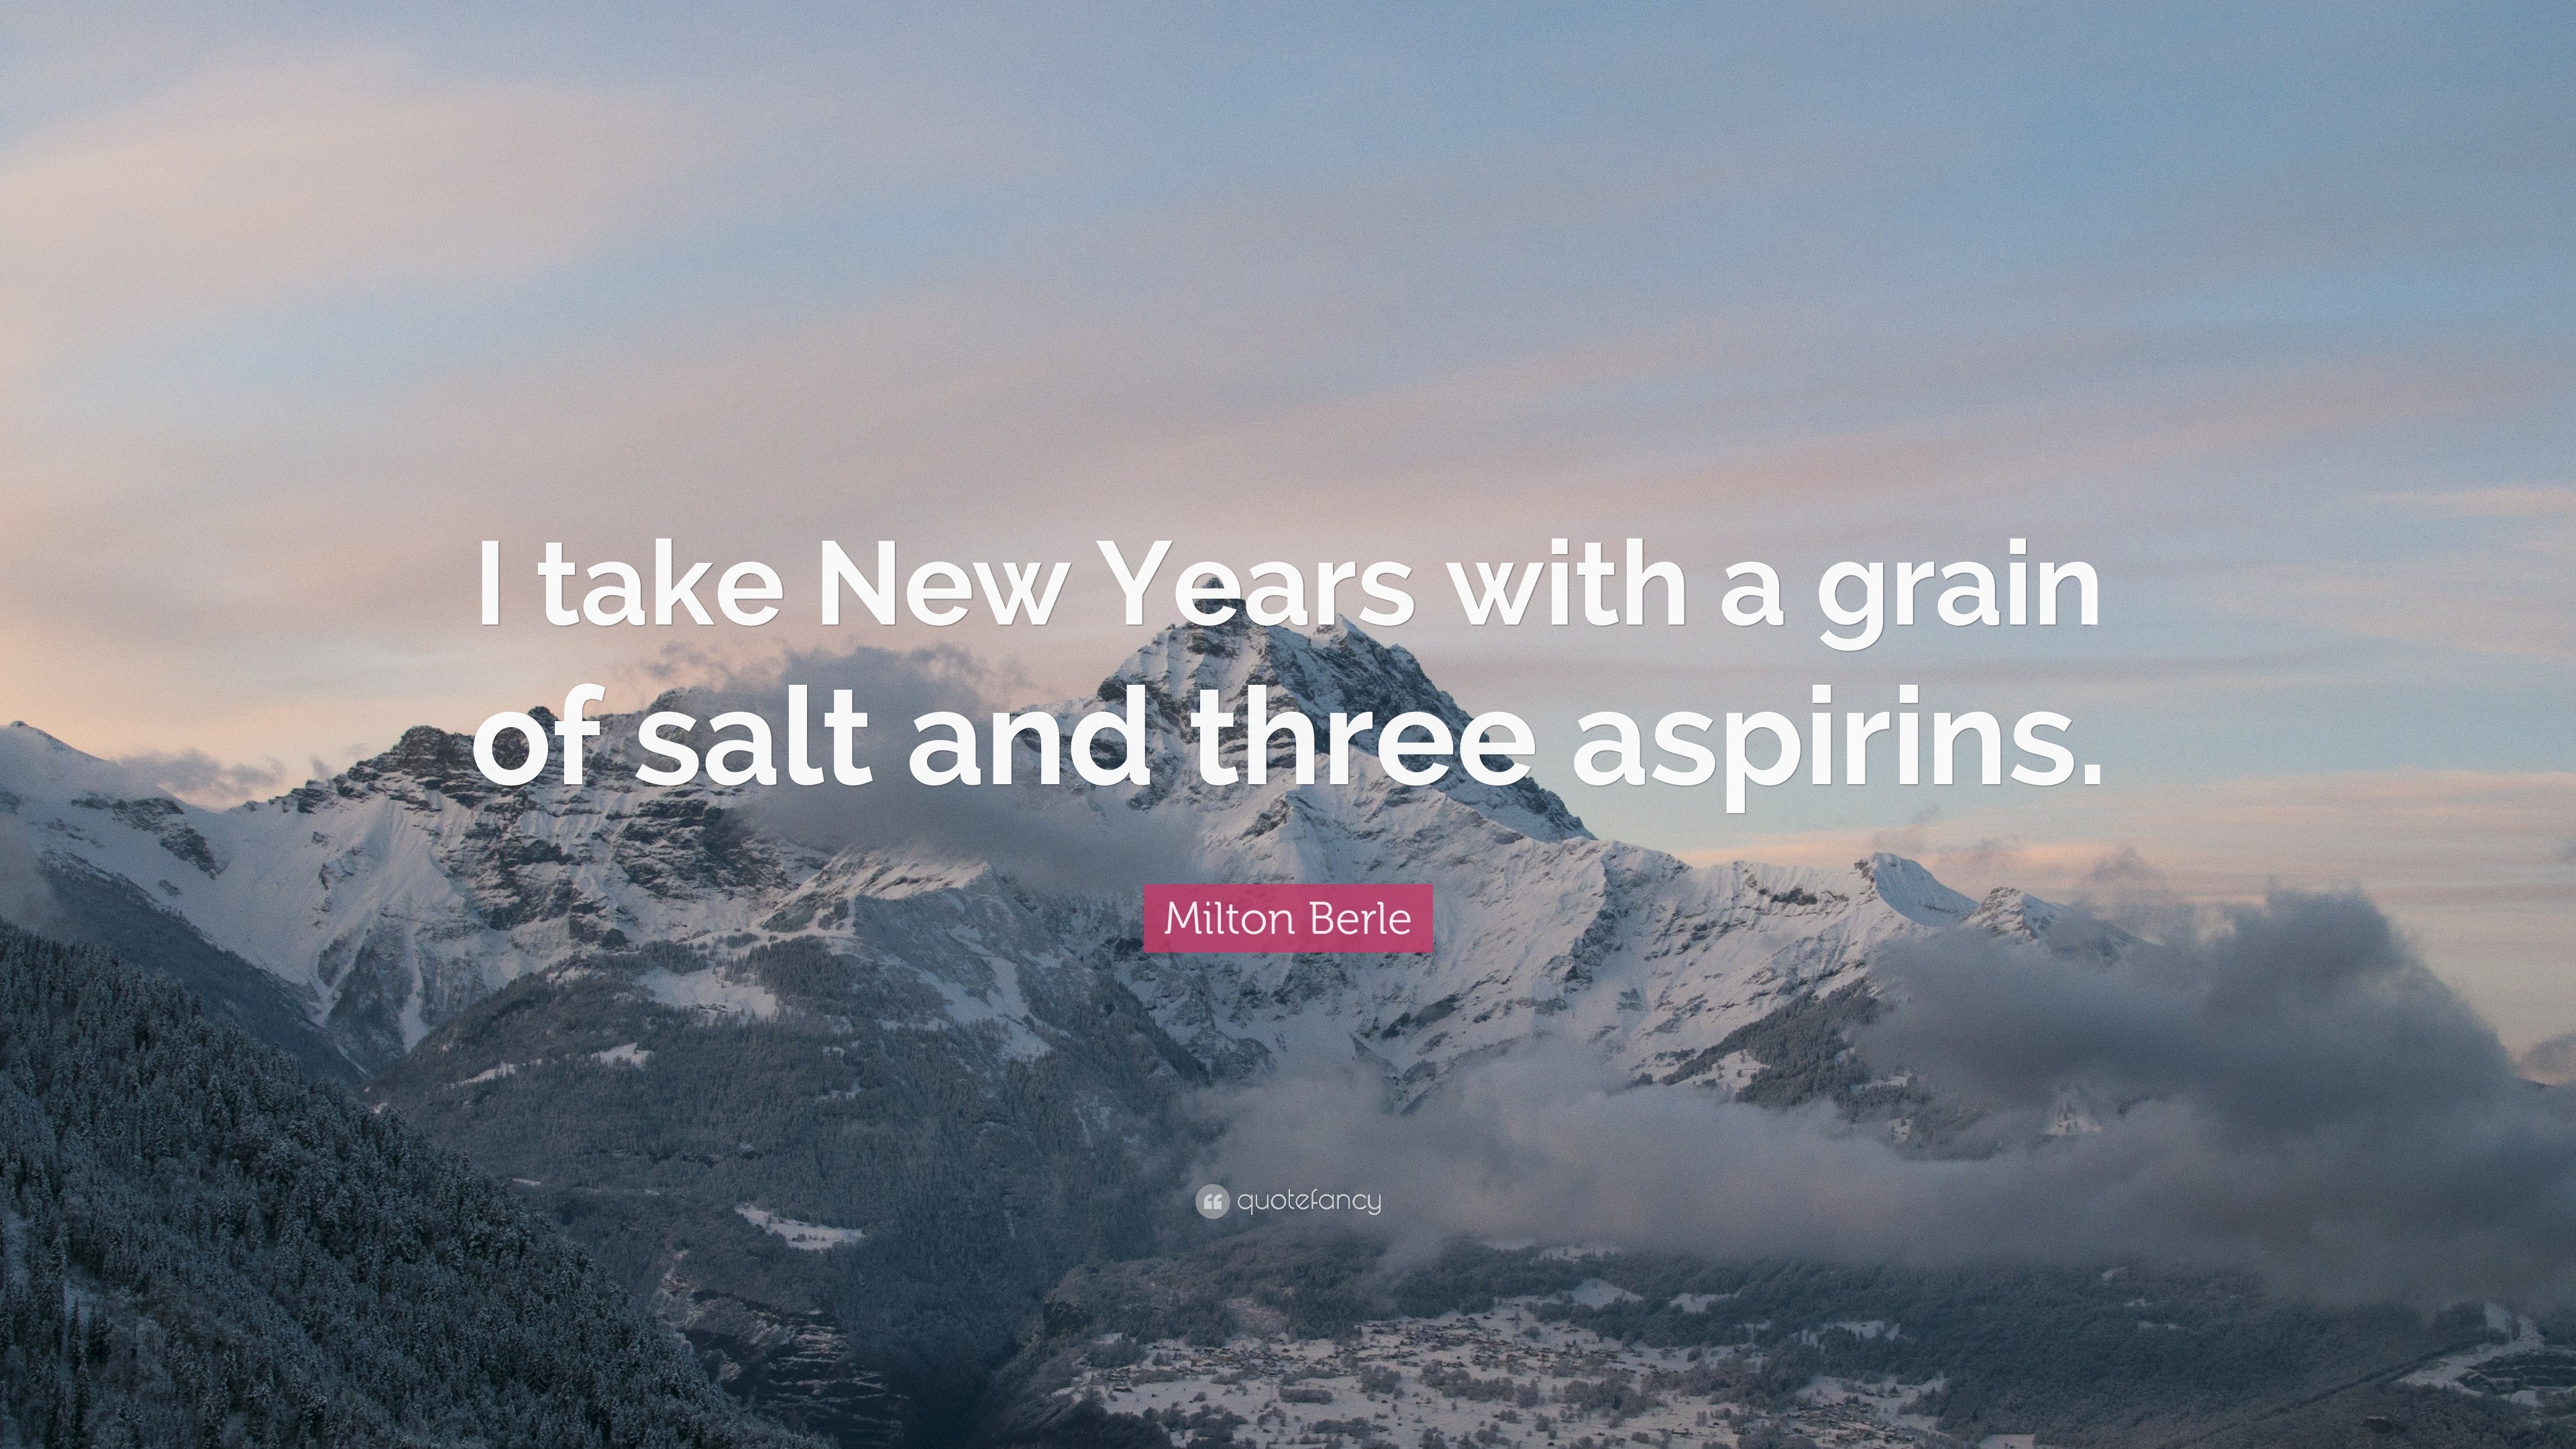 Milton Berle Quote: “I take New Years with a grain of salt and three  aspirins.”